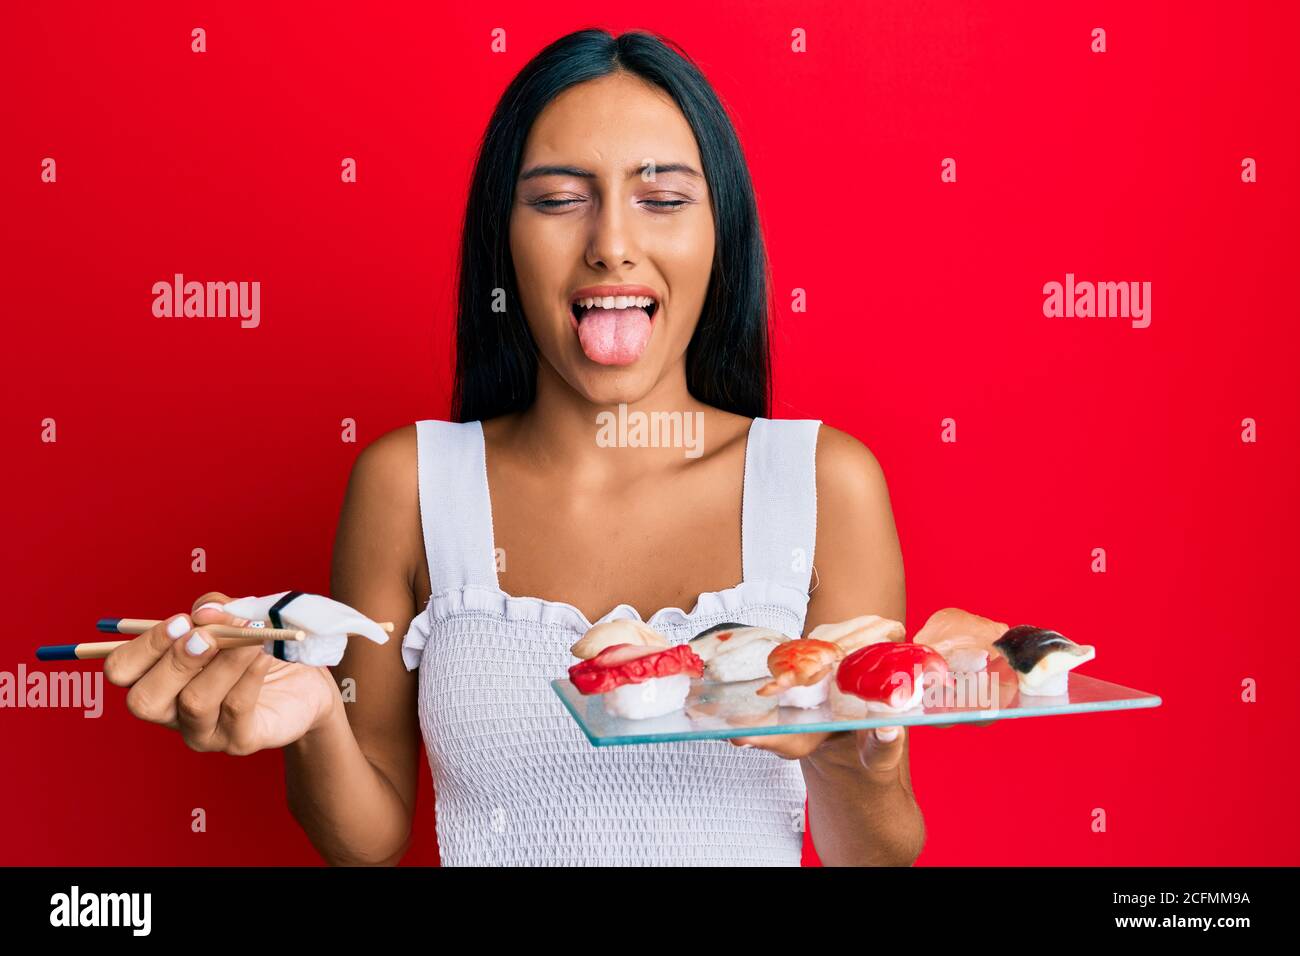 Young Brunette Woman Eating Butterfish Sushi Using Chopsticks Sticking Tongue Out Happy With Funny Expression Stock Photo Alamy